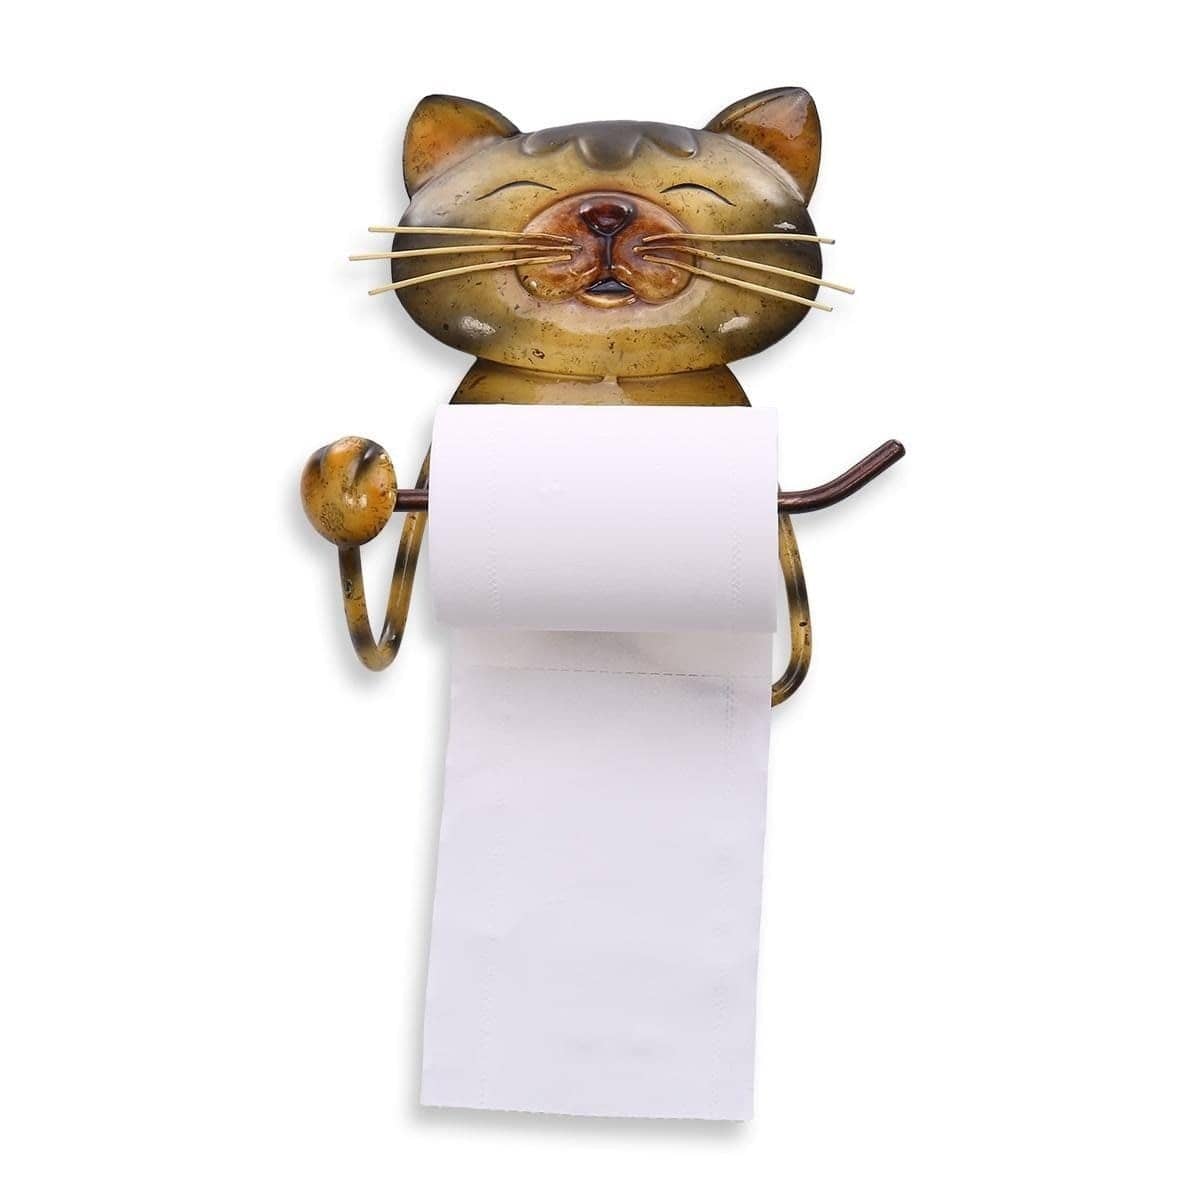 Cat Paper Roll Towel Holder - Playful Bathroom Accessory